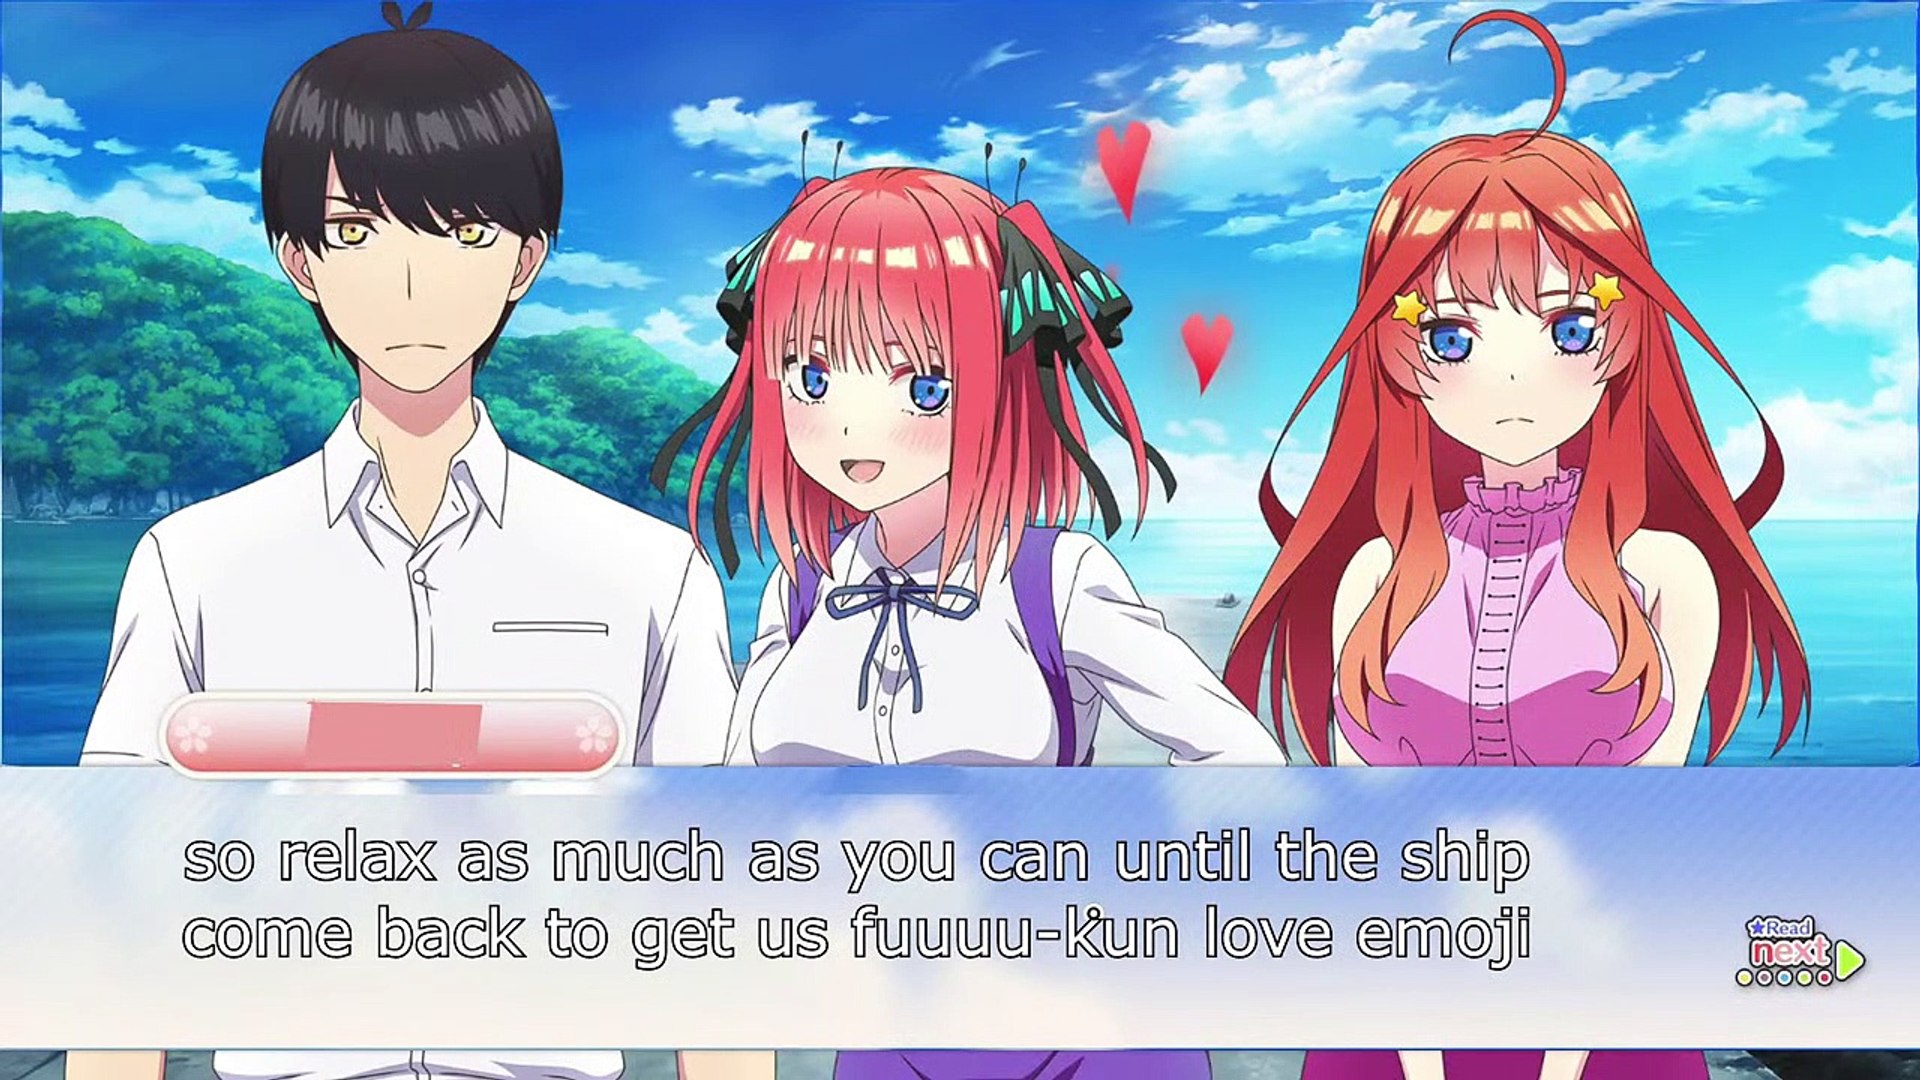 The Quintessential Quintuplets the Movie : Five Memories of My Time with  You - Switch